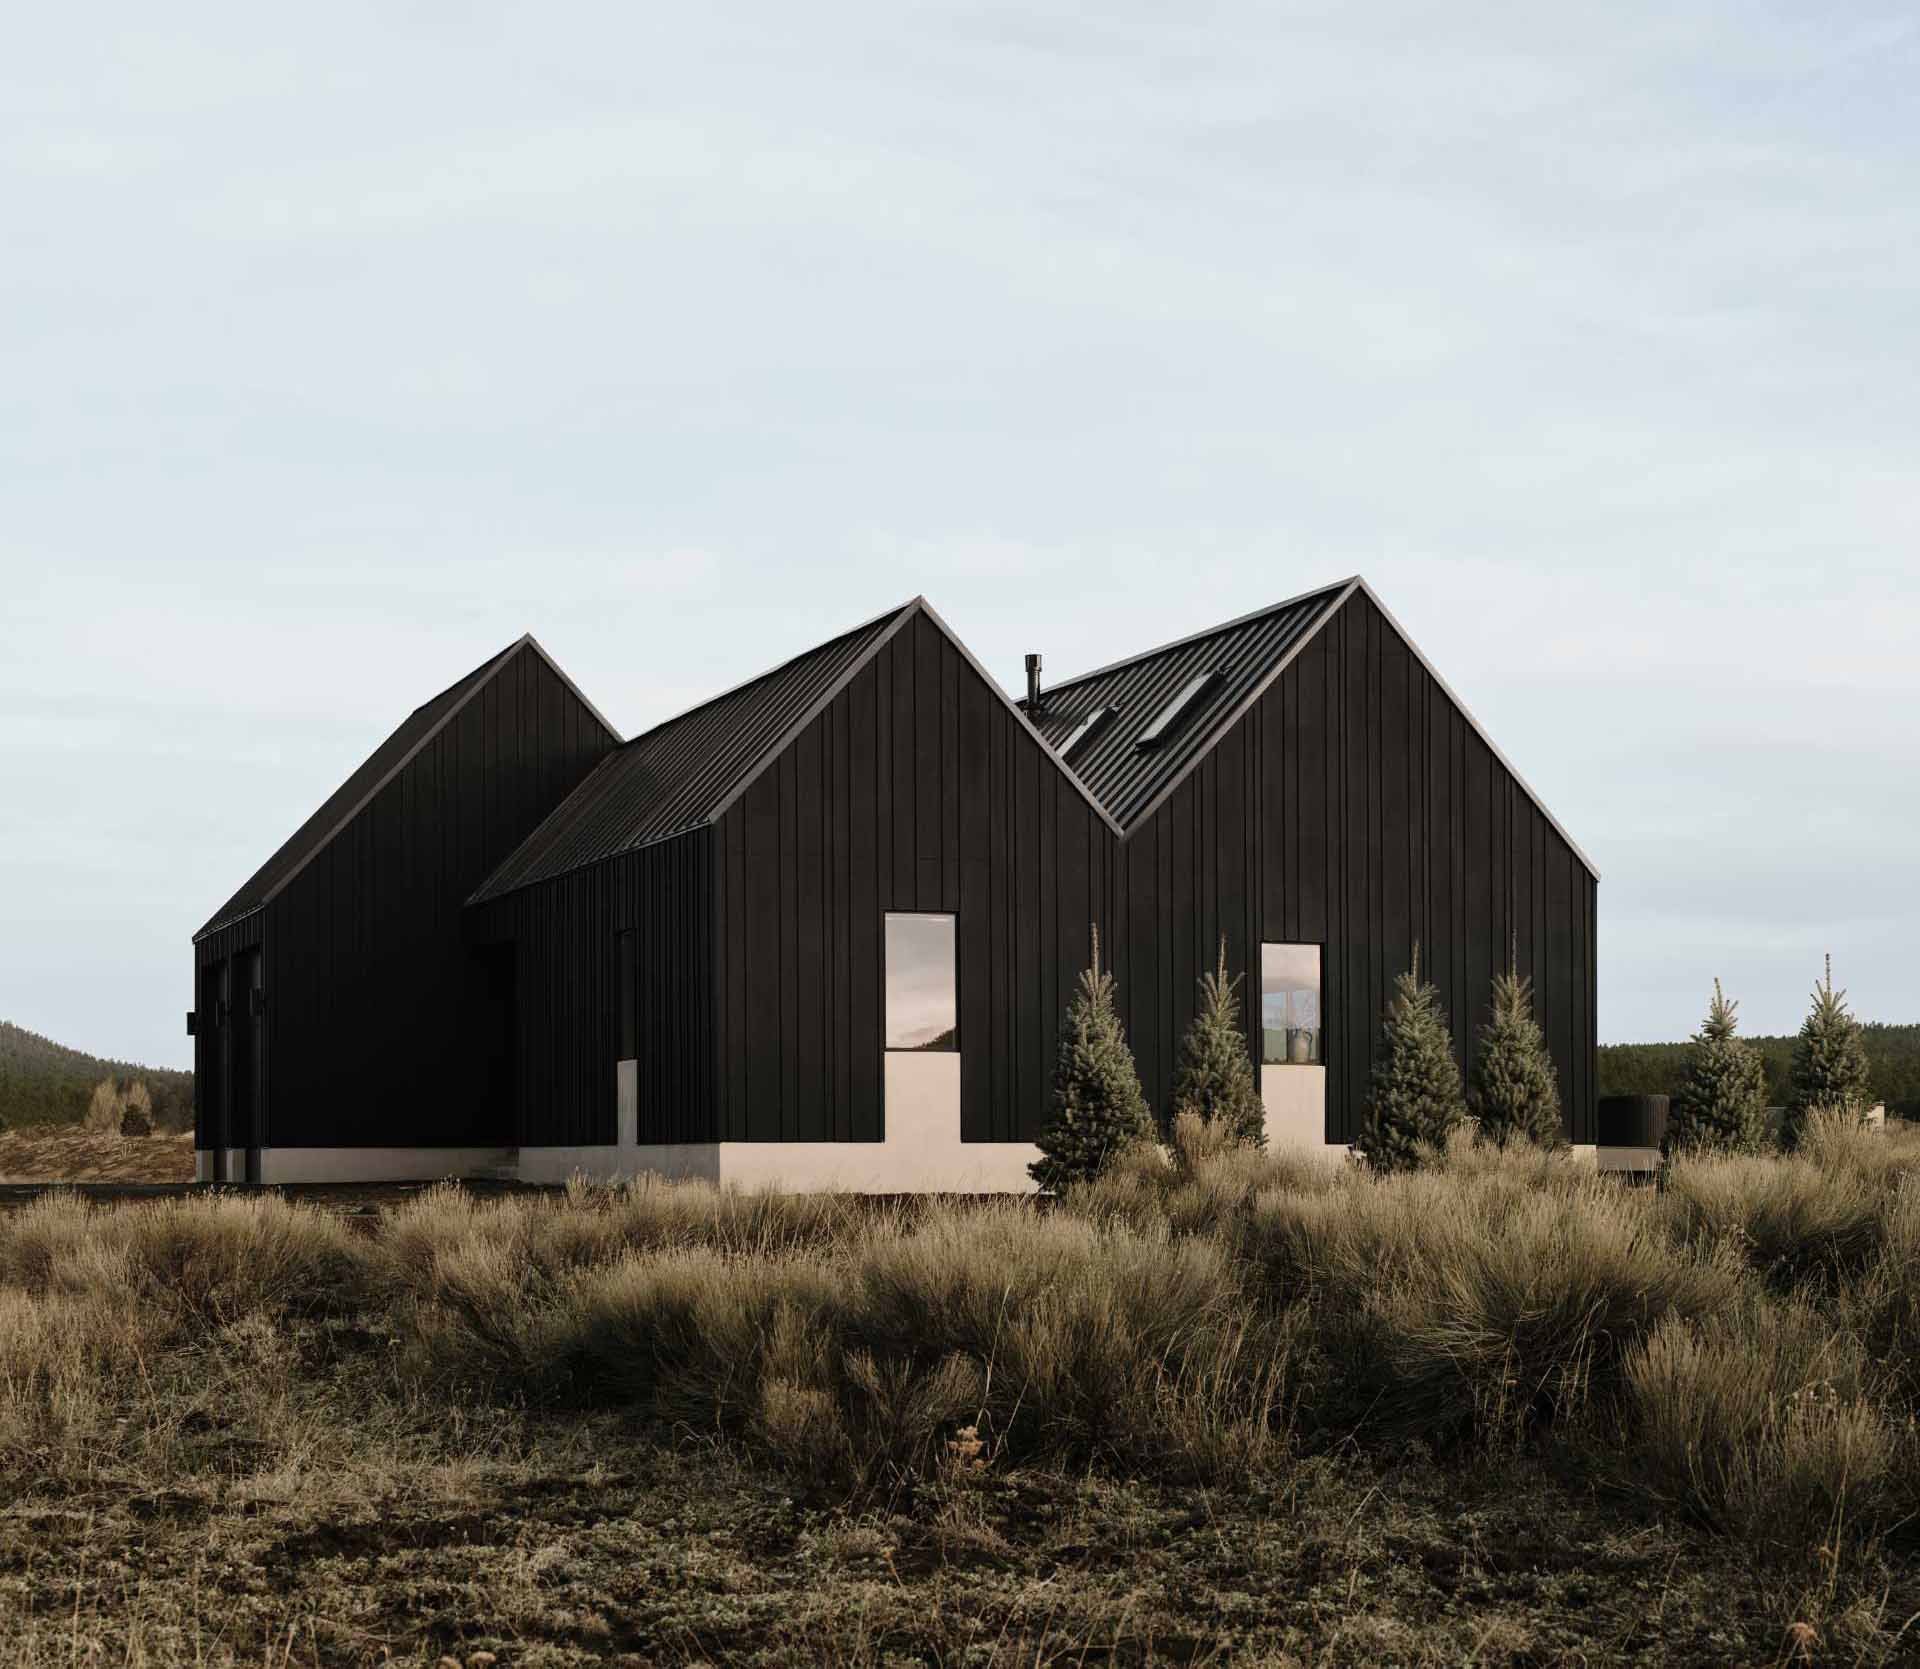 The surrounding landscape is reflected in the decision to choose a black exterior for the home, while the interiors were inspired by the Danish concept of Hygge.